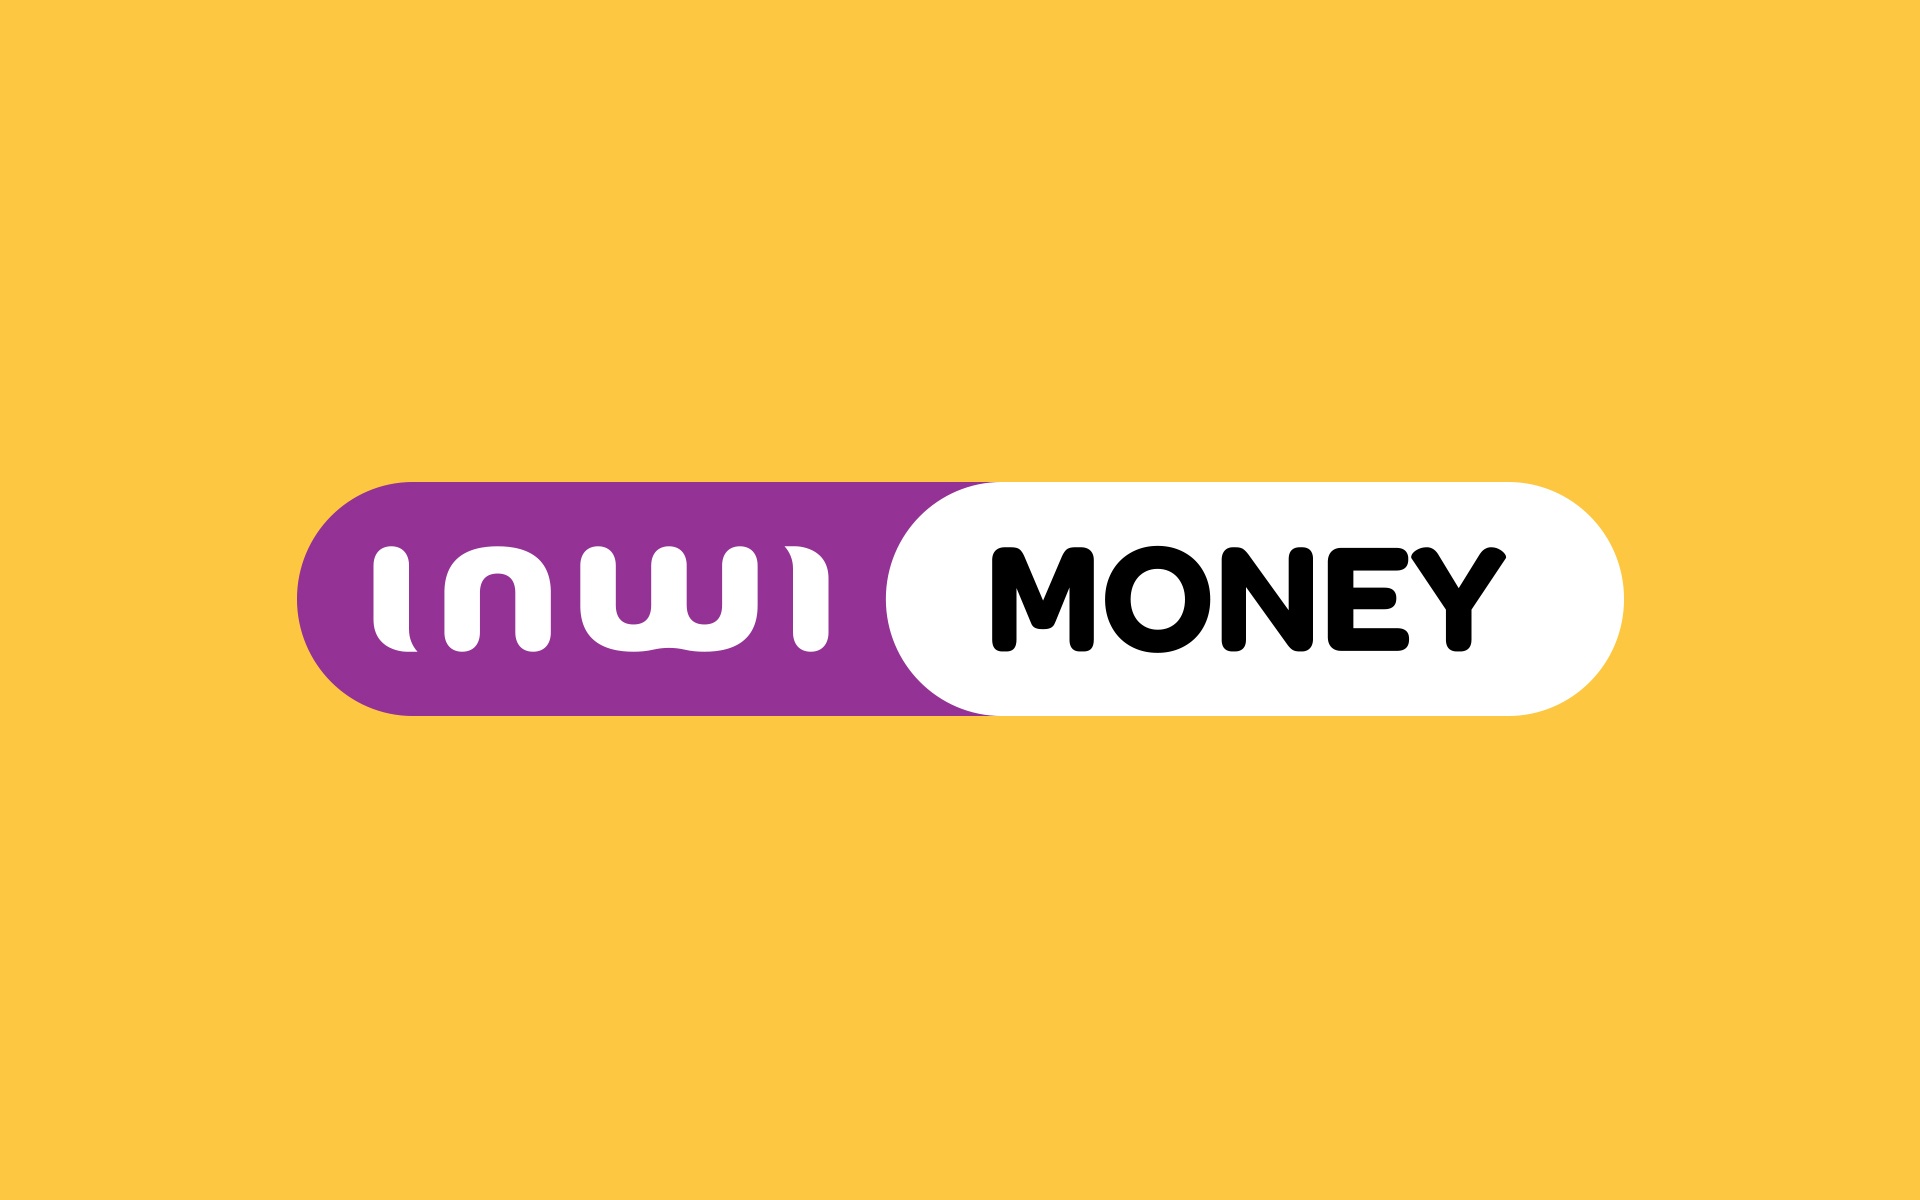 Moroccans Enjoy ‘inwi money’ Powered by Comviva